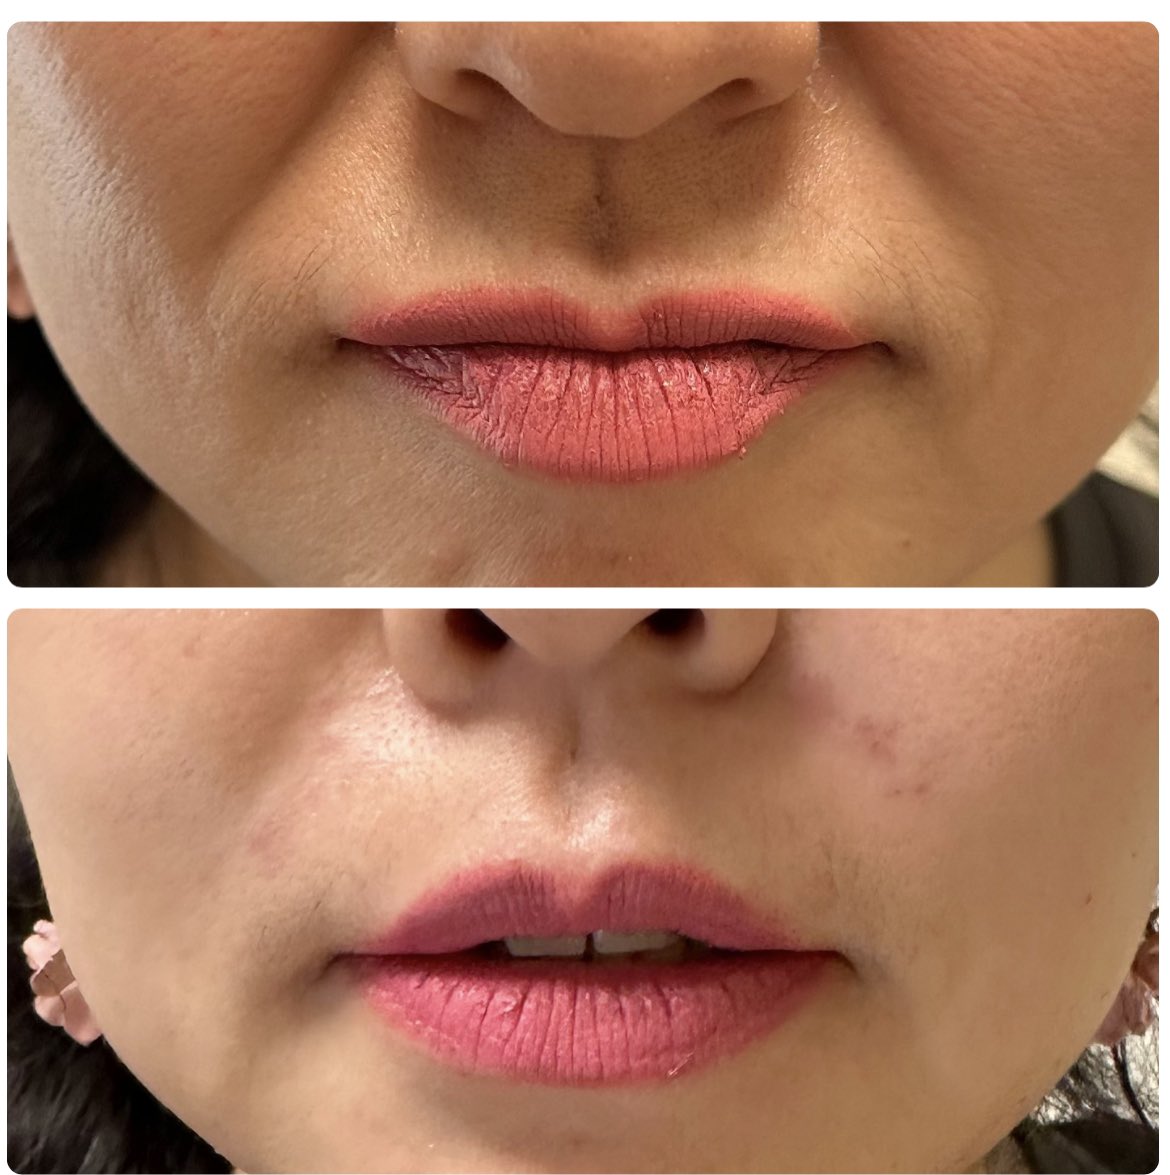 This client was ready to fill in her nasolabial folds. Just a little went a long way for her. Call me @monamispa to get a consult!! #пр #medspa #juvederm #filler #skin #spa #aesthetic #allergan #injector